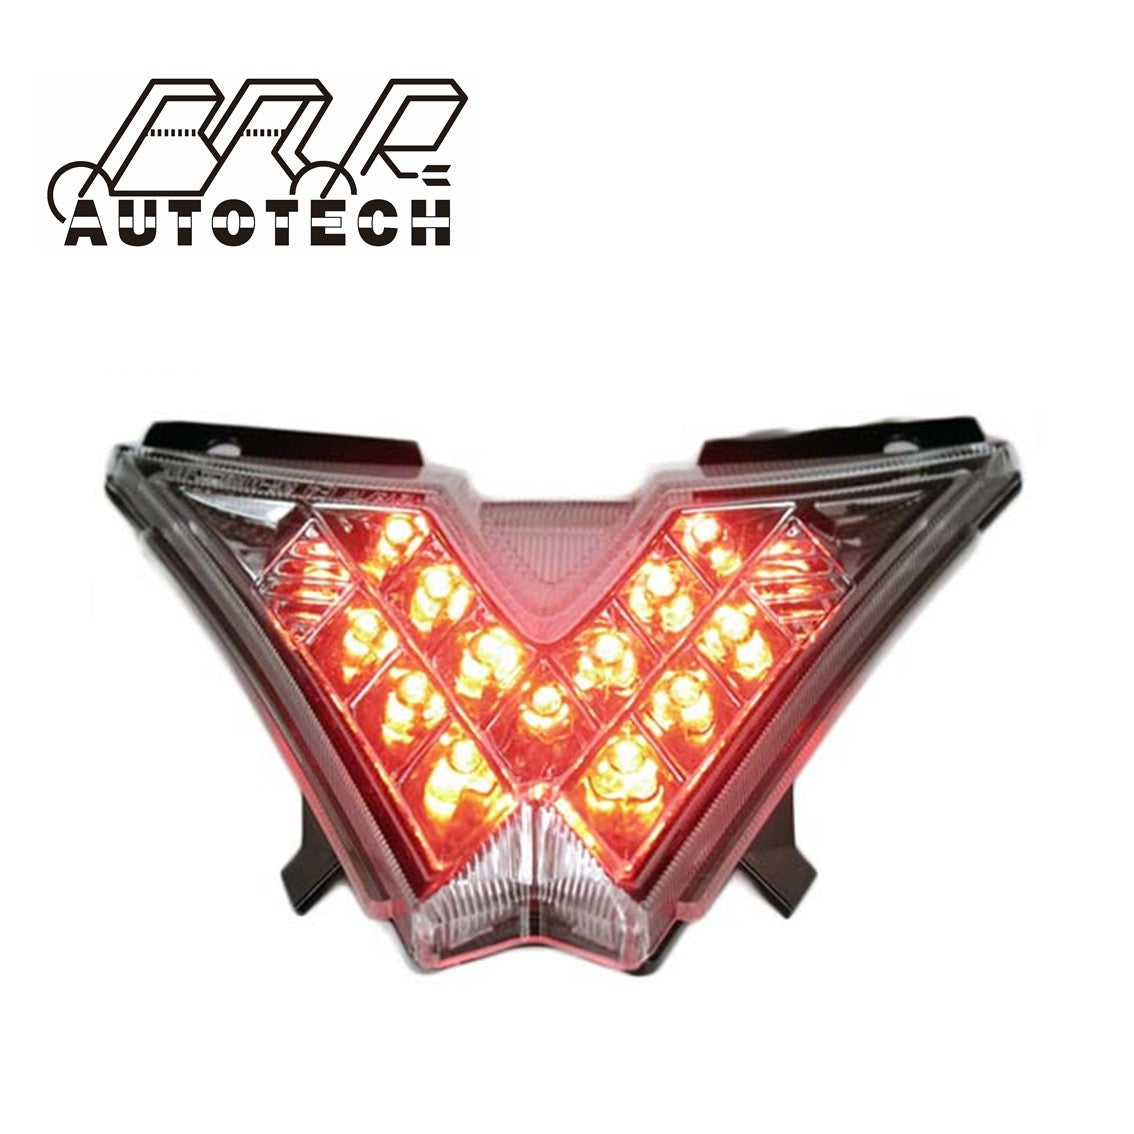 For APRILIA RSV4 integrated motorcycle LED tail lights for brake rear lamp